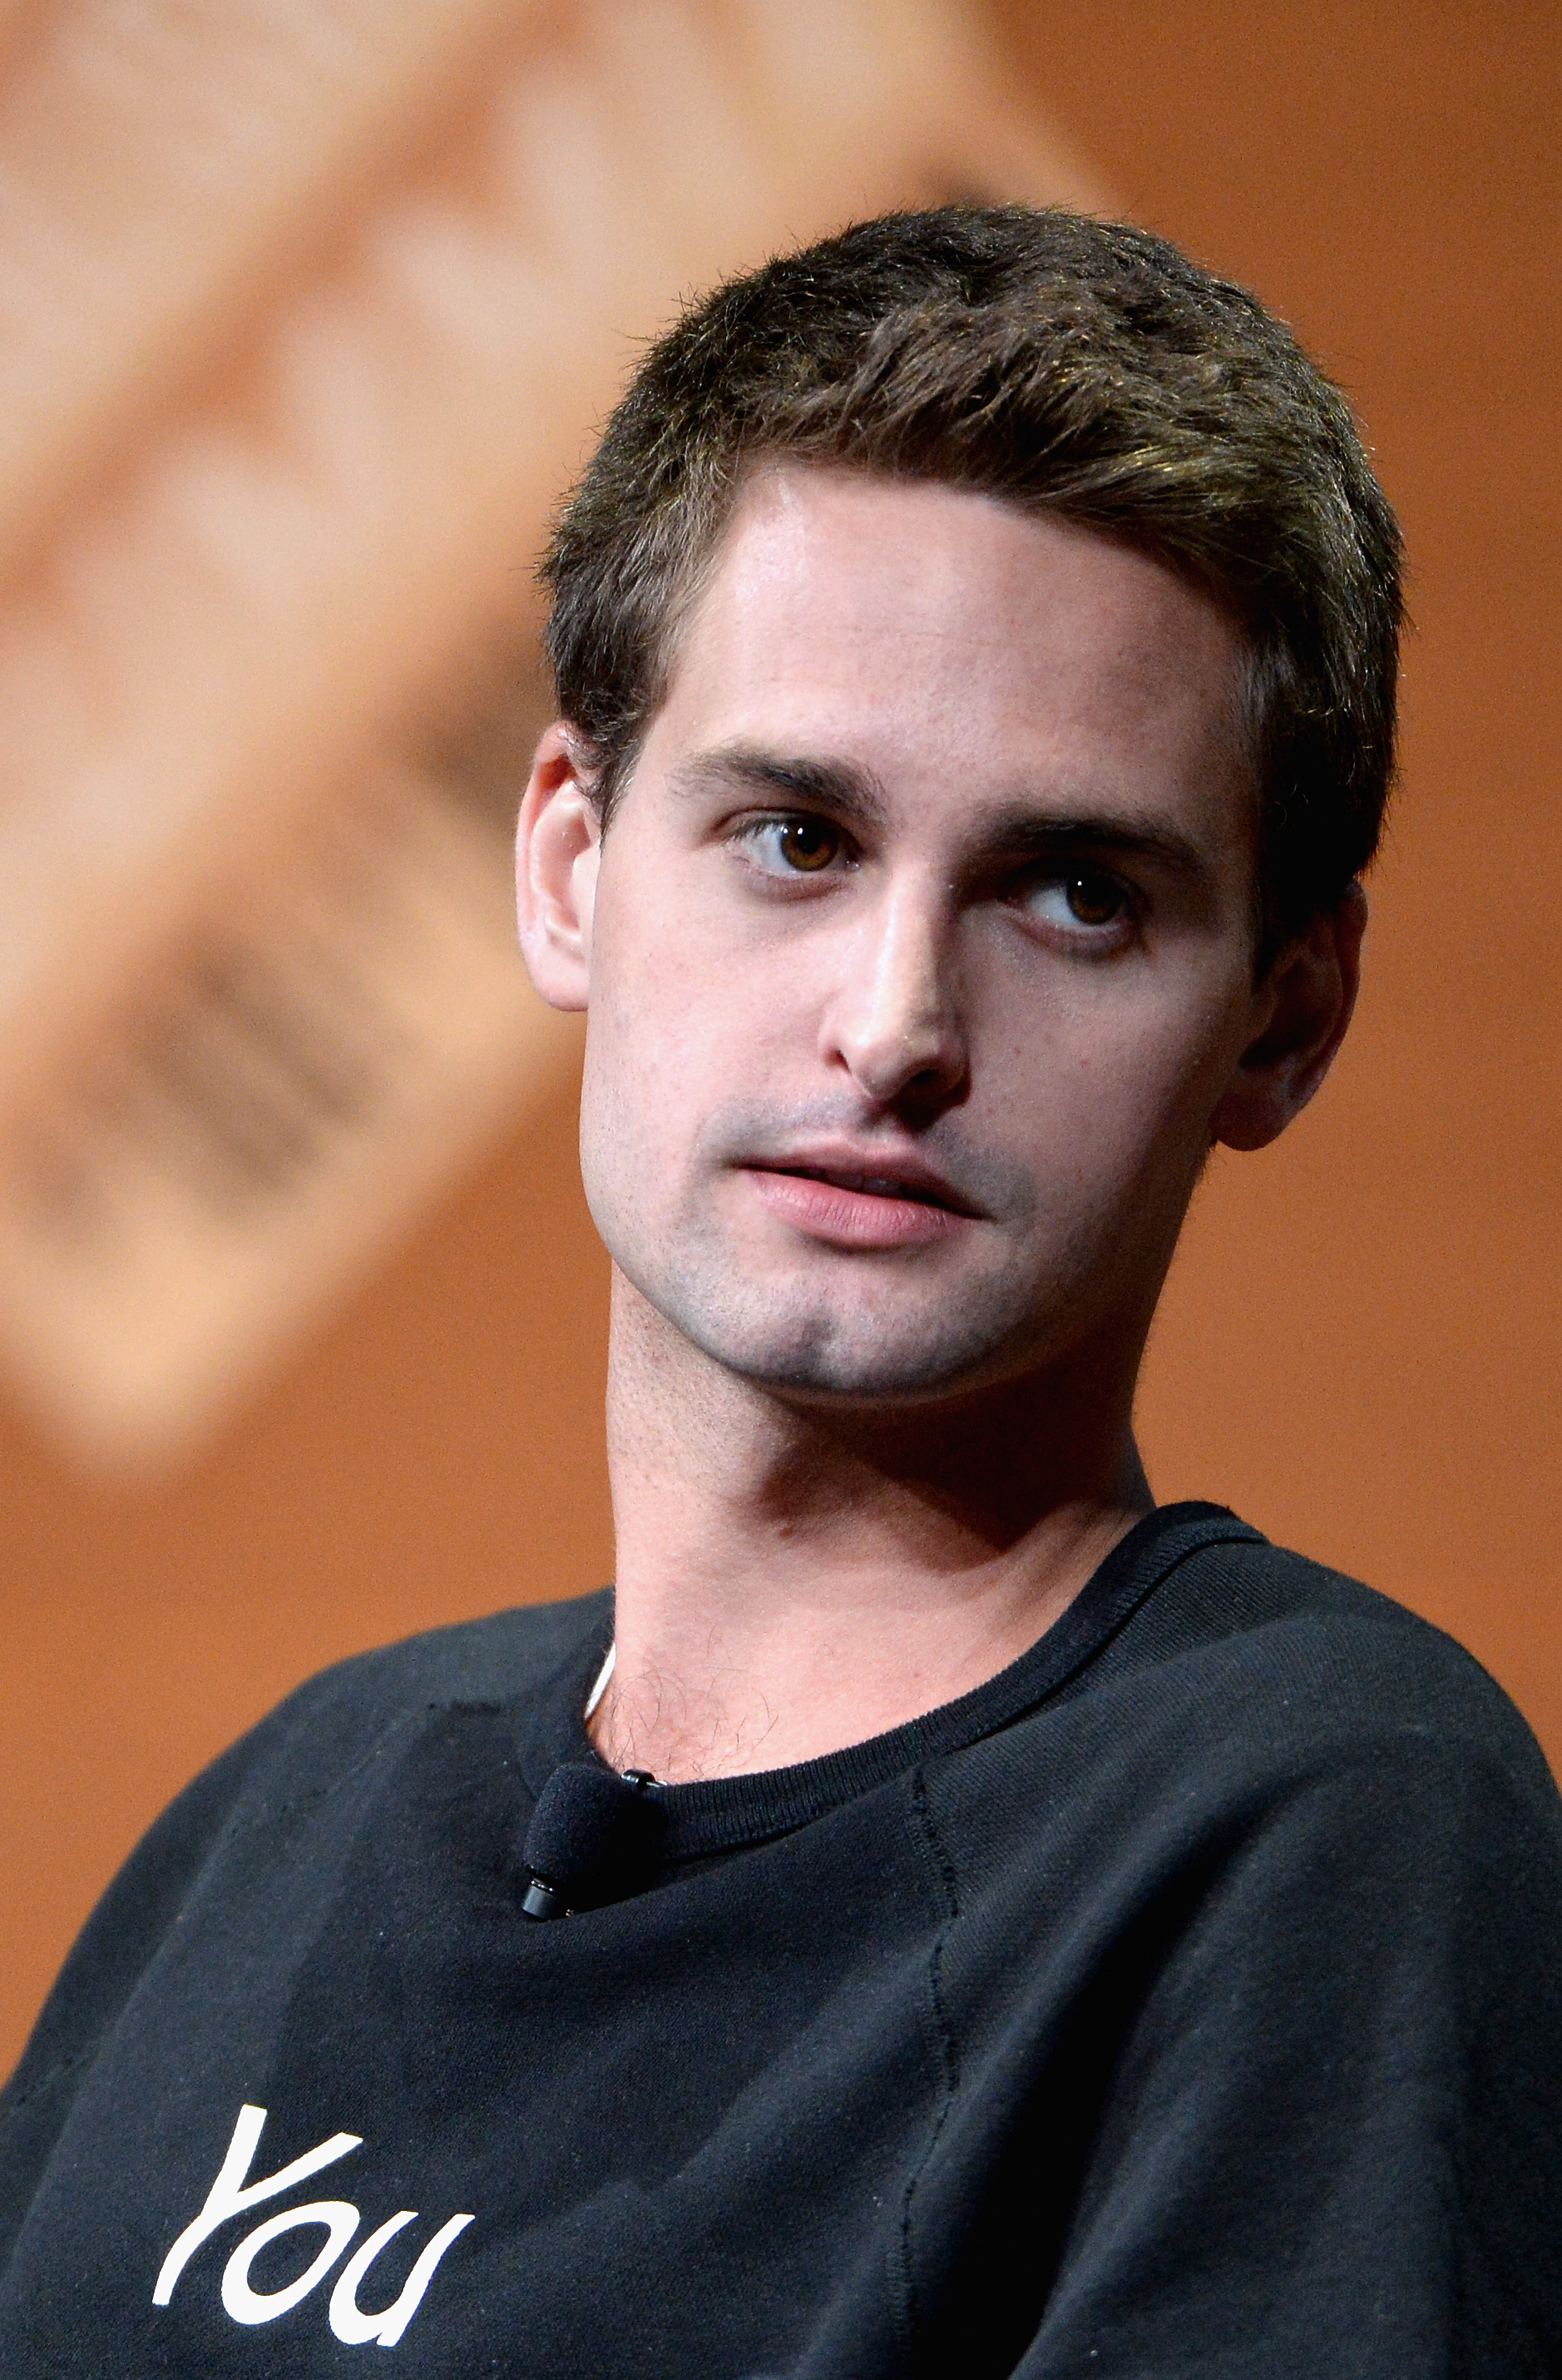 Evan Spiegel during "Disrupting Information and Communication" at the Vanity Fair New Establishment Summit in San Francisco on Oct. 8, 2014.